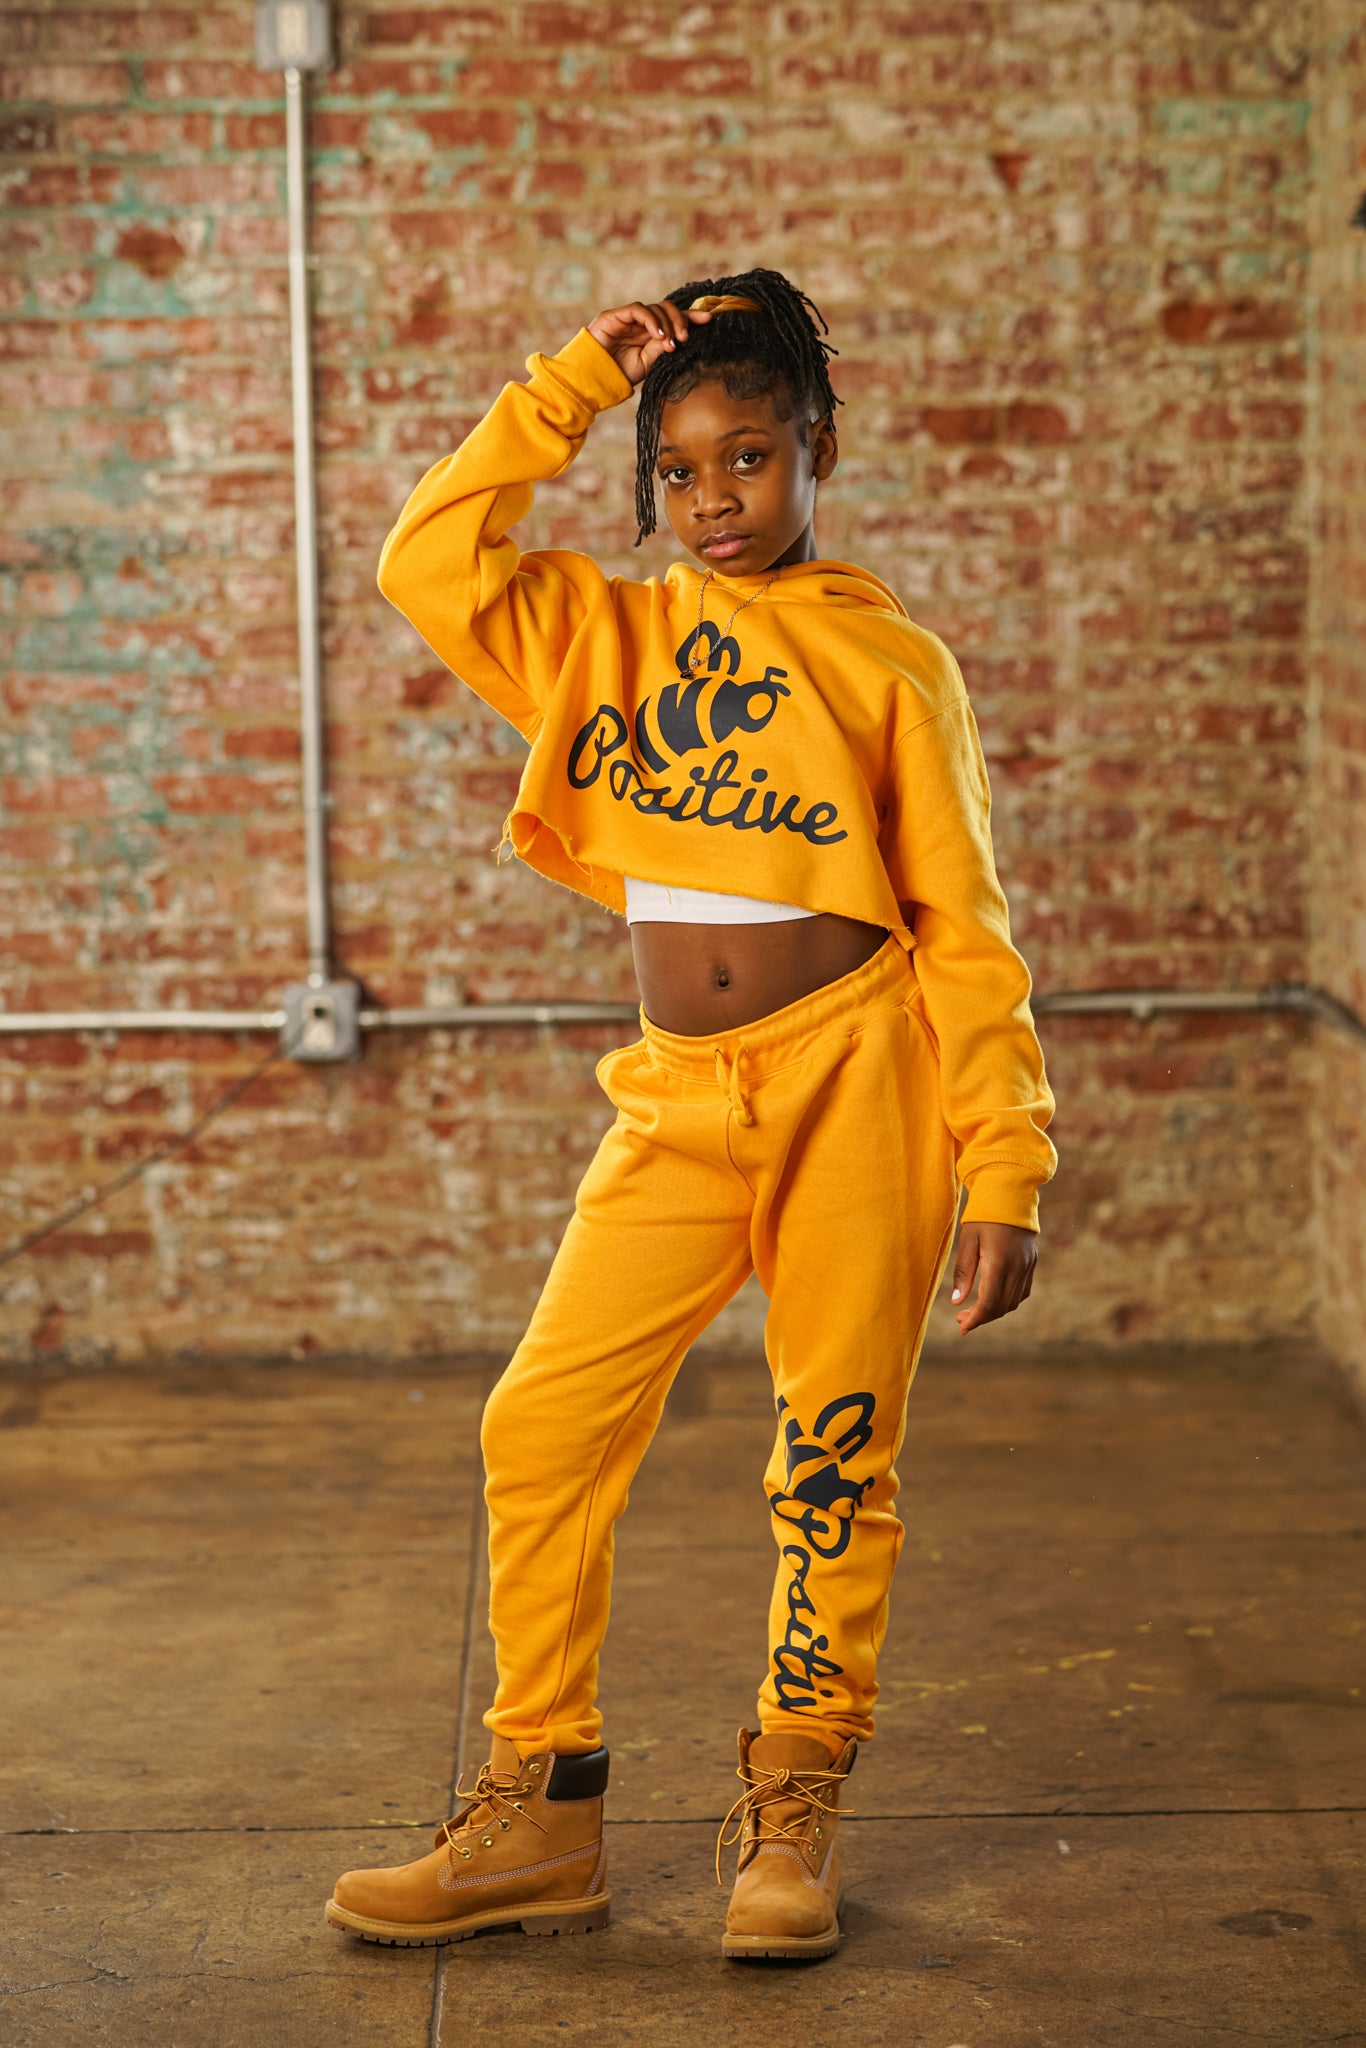 Youth ages 6-12 crop top, BE POSITIVE sweatsuit